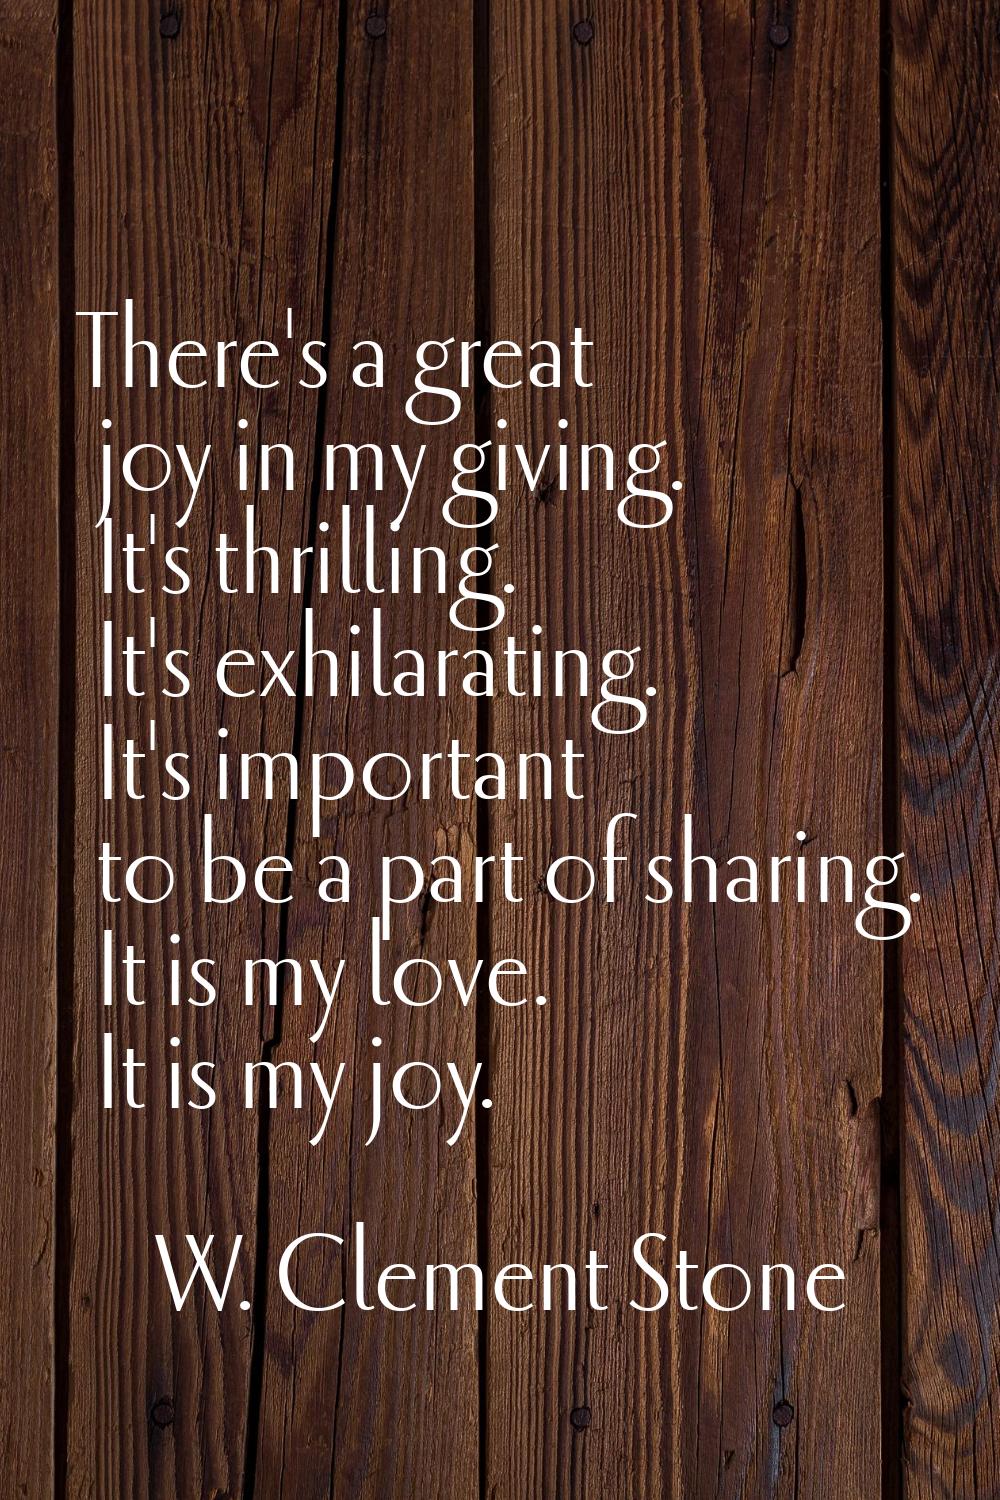 There's a great joy in my giving. It's thrilling. It's exhilarating. It's important to be a part of